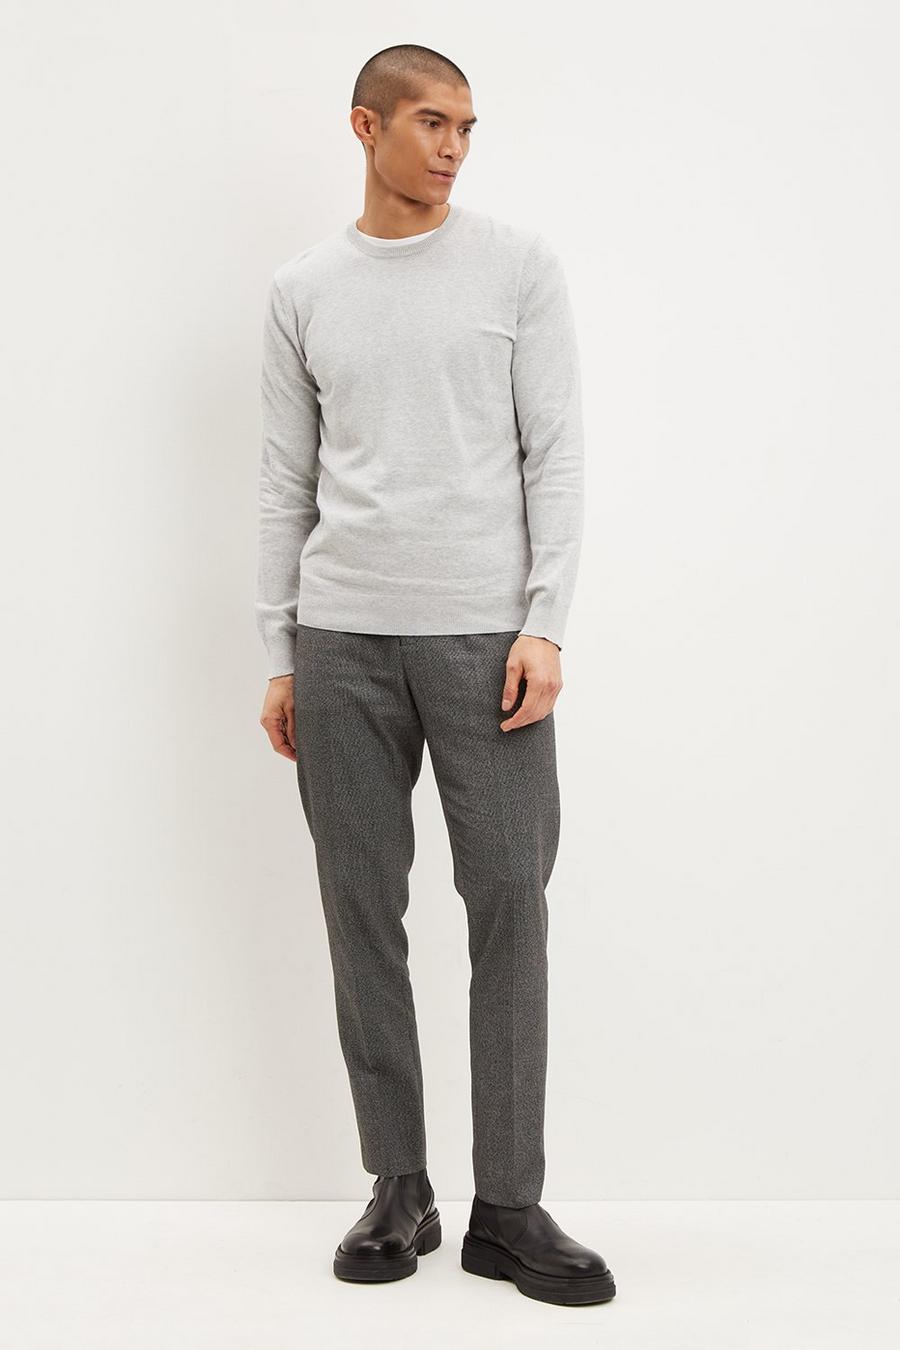 Crew Neck Knitted Grey Jumper